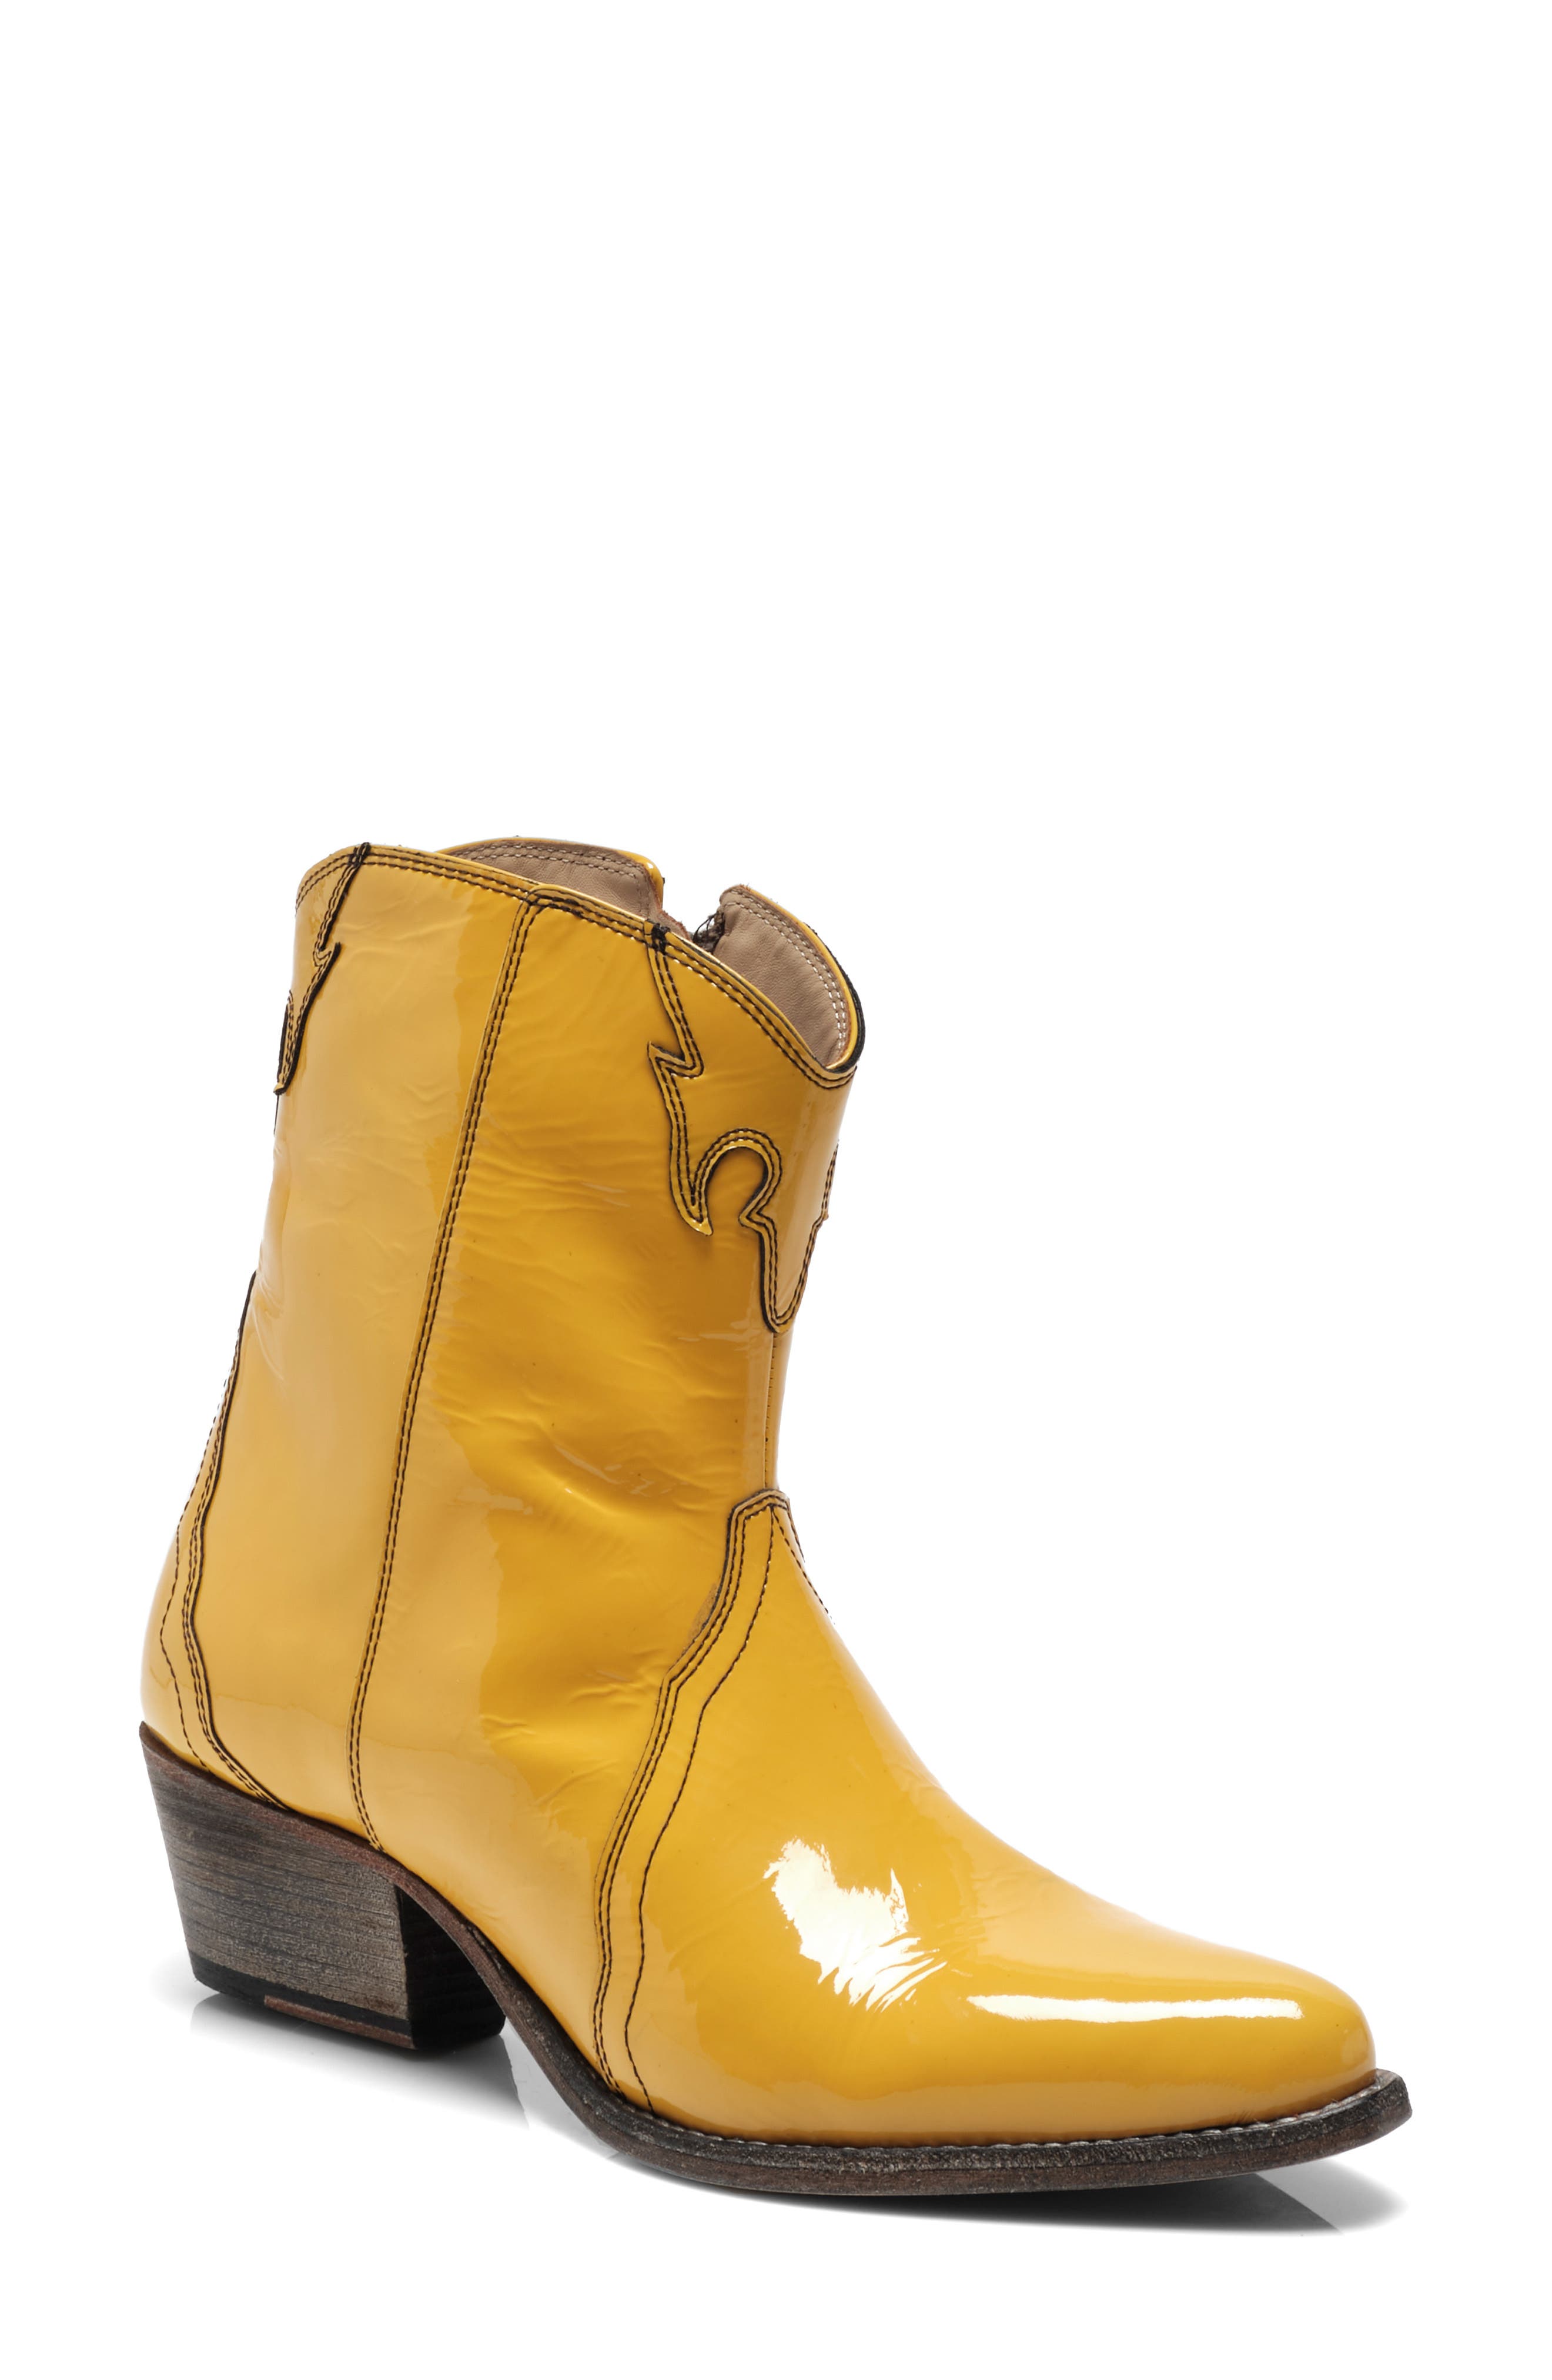 mustard colored boots